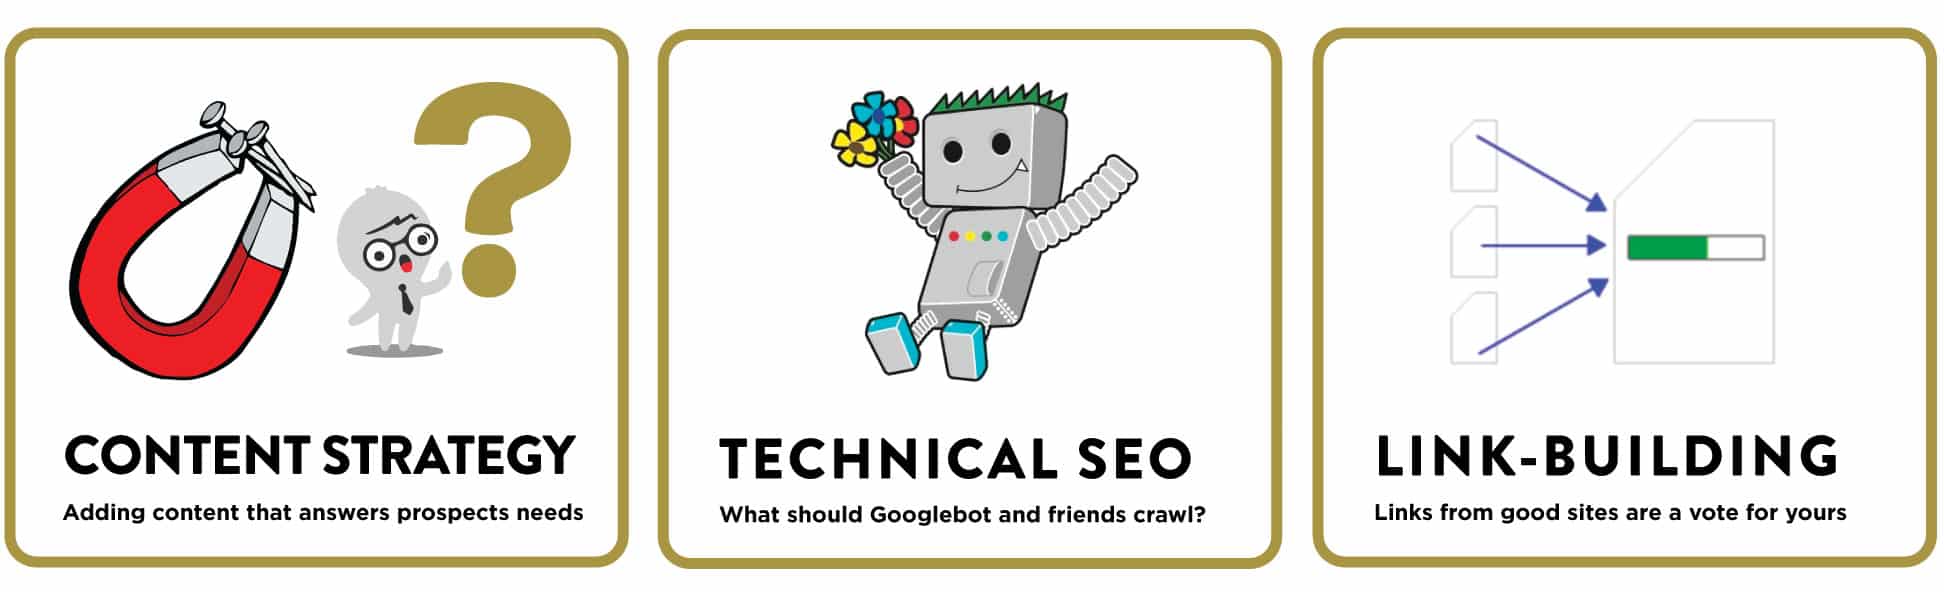 Technical SEO, Link Building, and Content Strategy Infographic